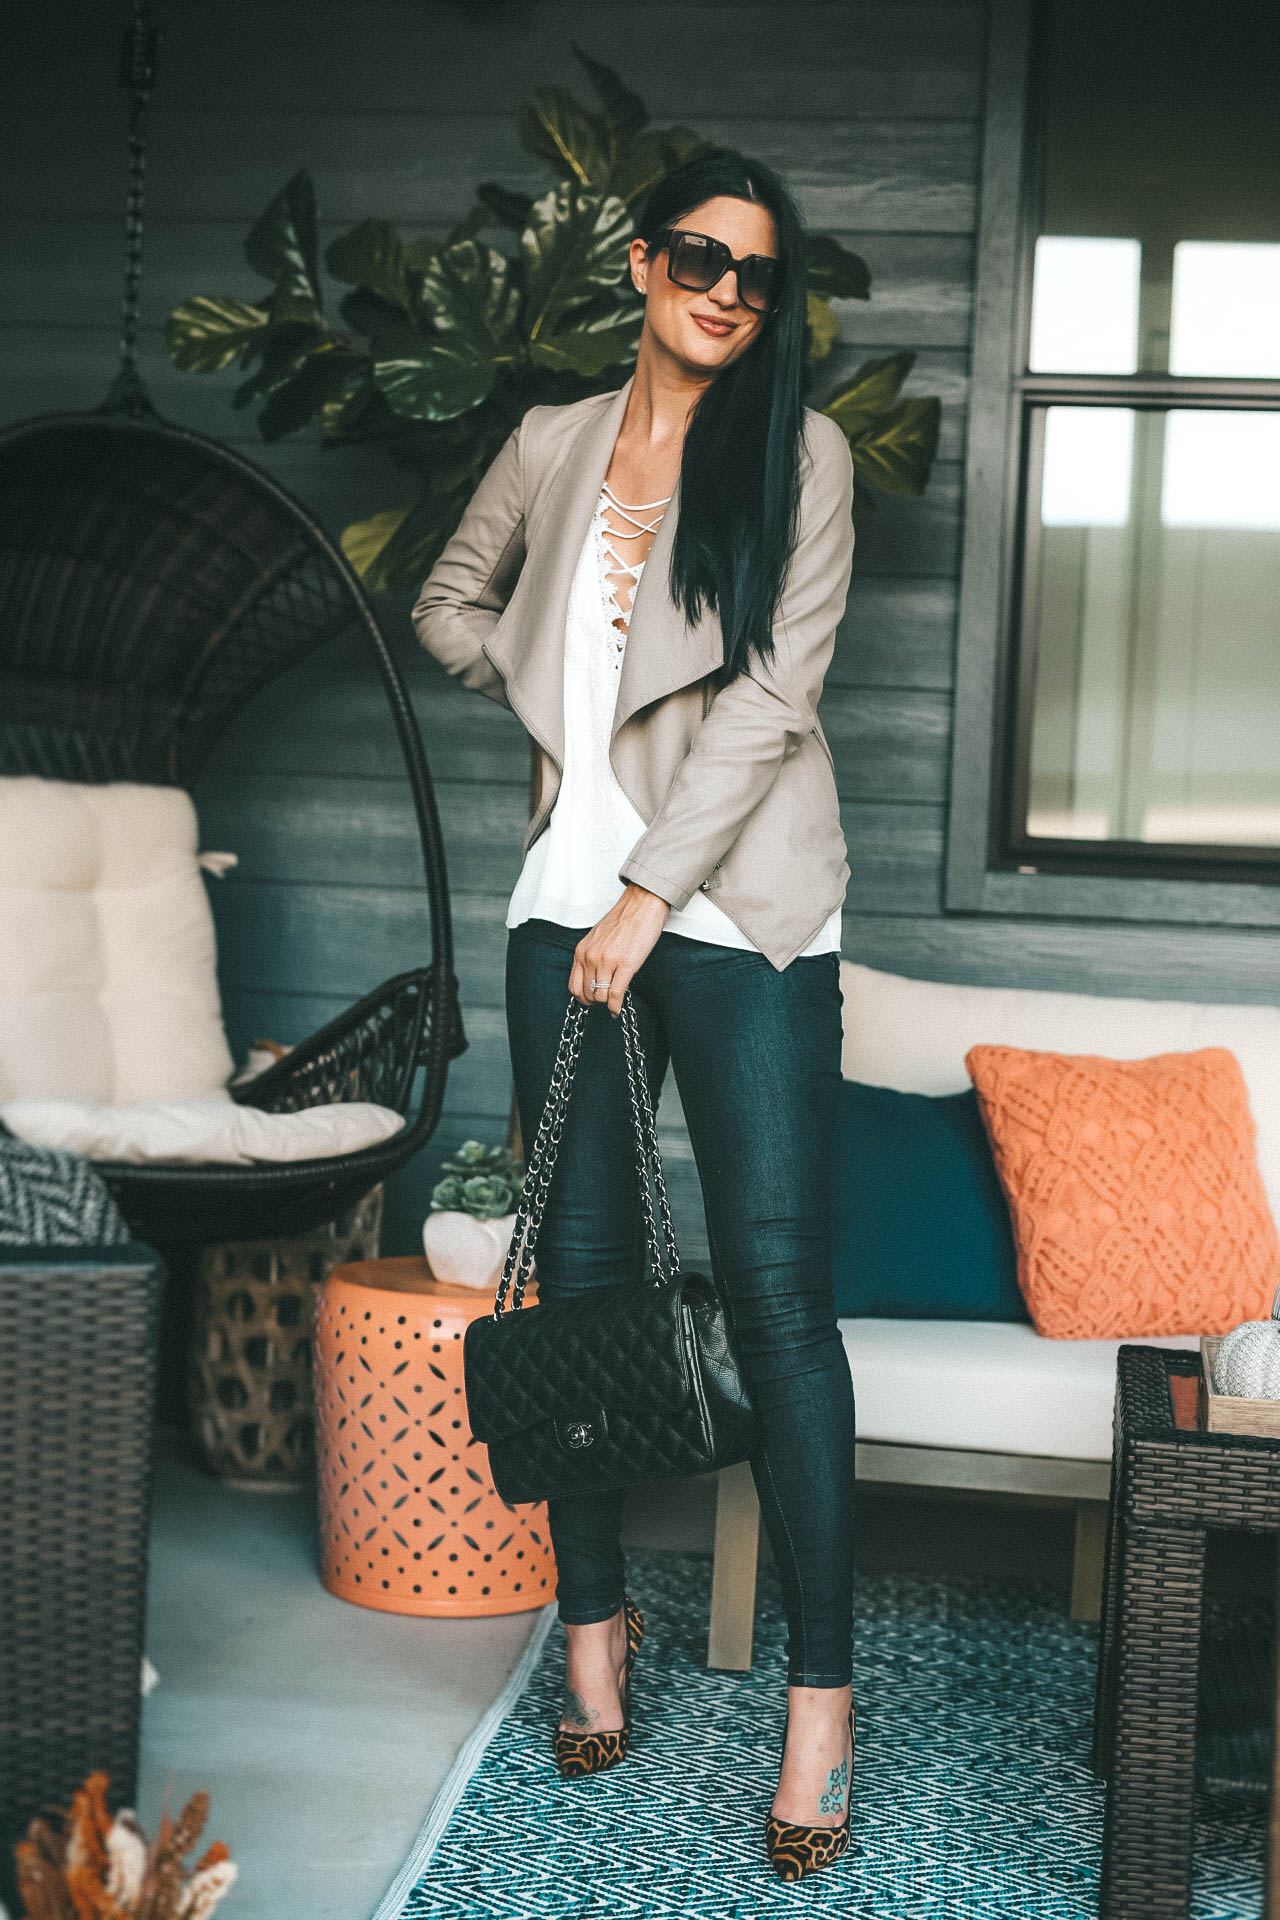 Nordstrom | Perfect transitional outfit into Fall on a budget | Chanel Black Caviar Jumbo Bag with Christian Louboutin Leopard Heels | WAYF Posie Strappy Camisole featured by popular Austin fashion blooger Dressed to Kill